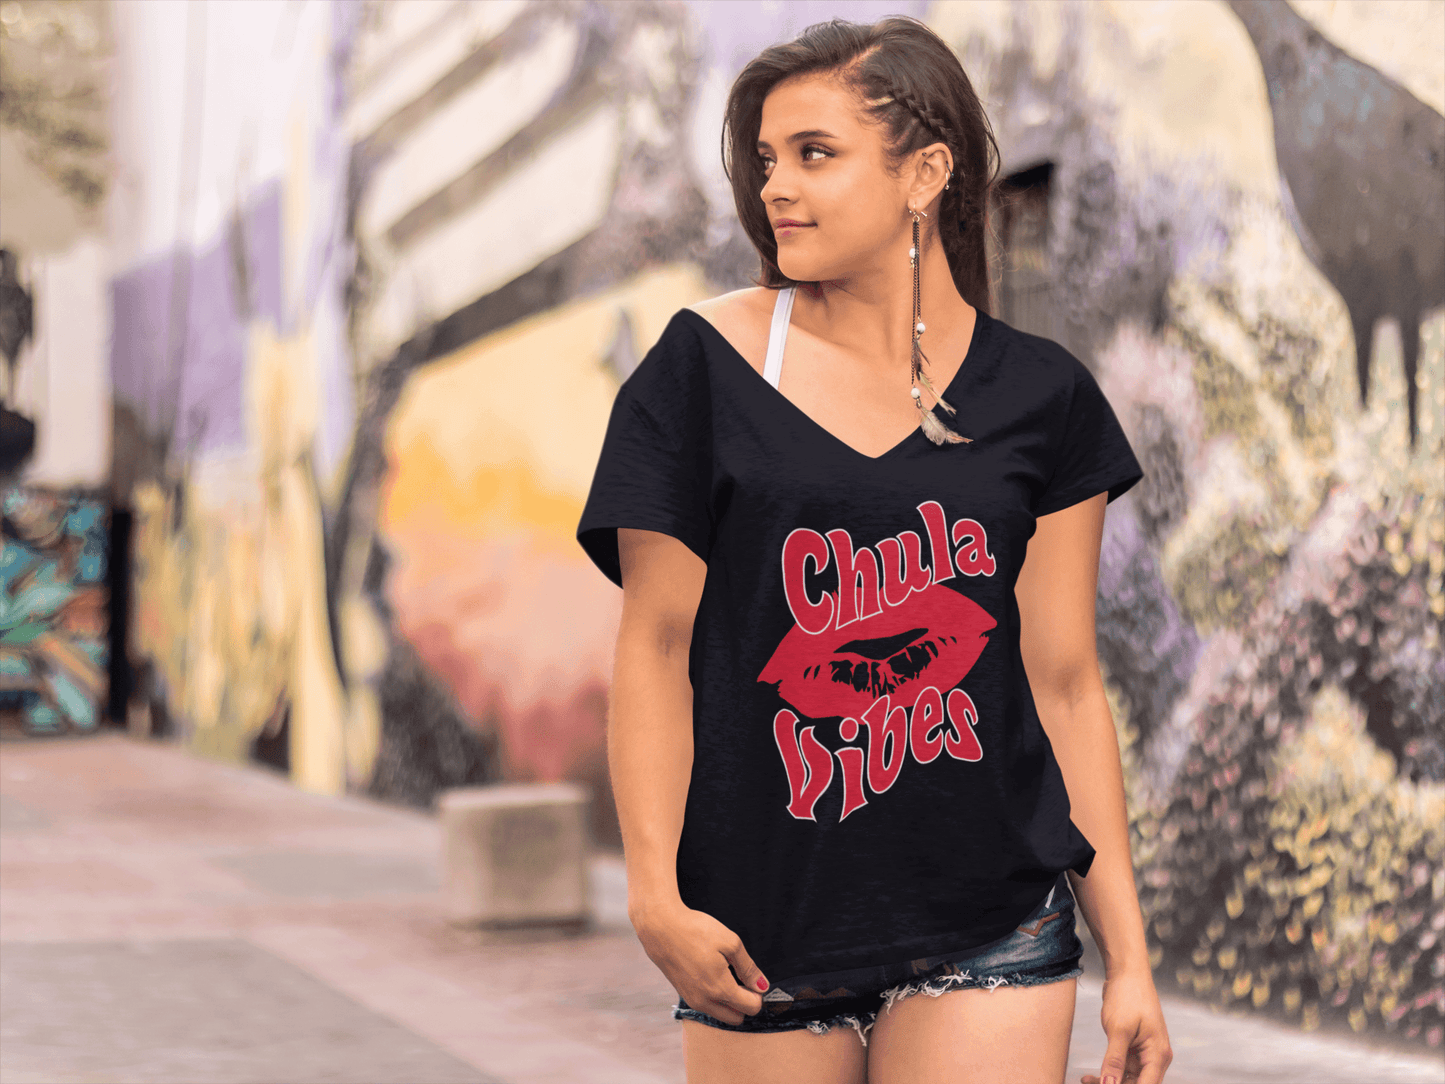 Black V-neck t-shirt with the text, "Chula Vibes" in red ink and an image of lips. This cute tee comes in sizes small thru 3XL. It is available at www.sanchezhere.com